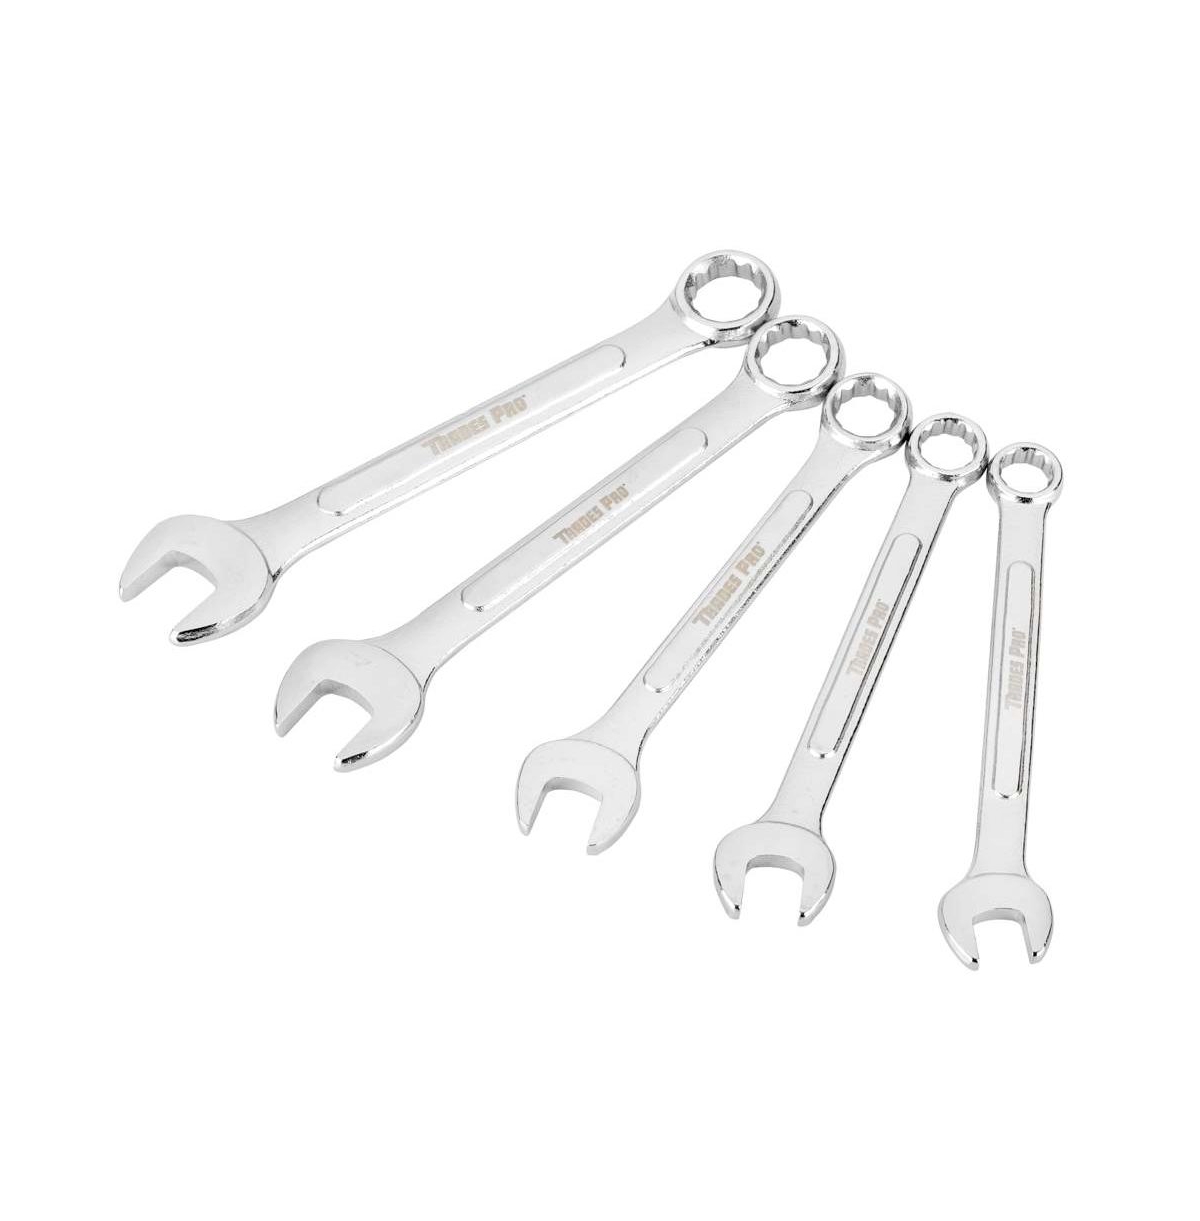 5 Piece Sae Combination Wrenches - Silver